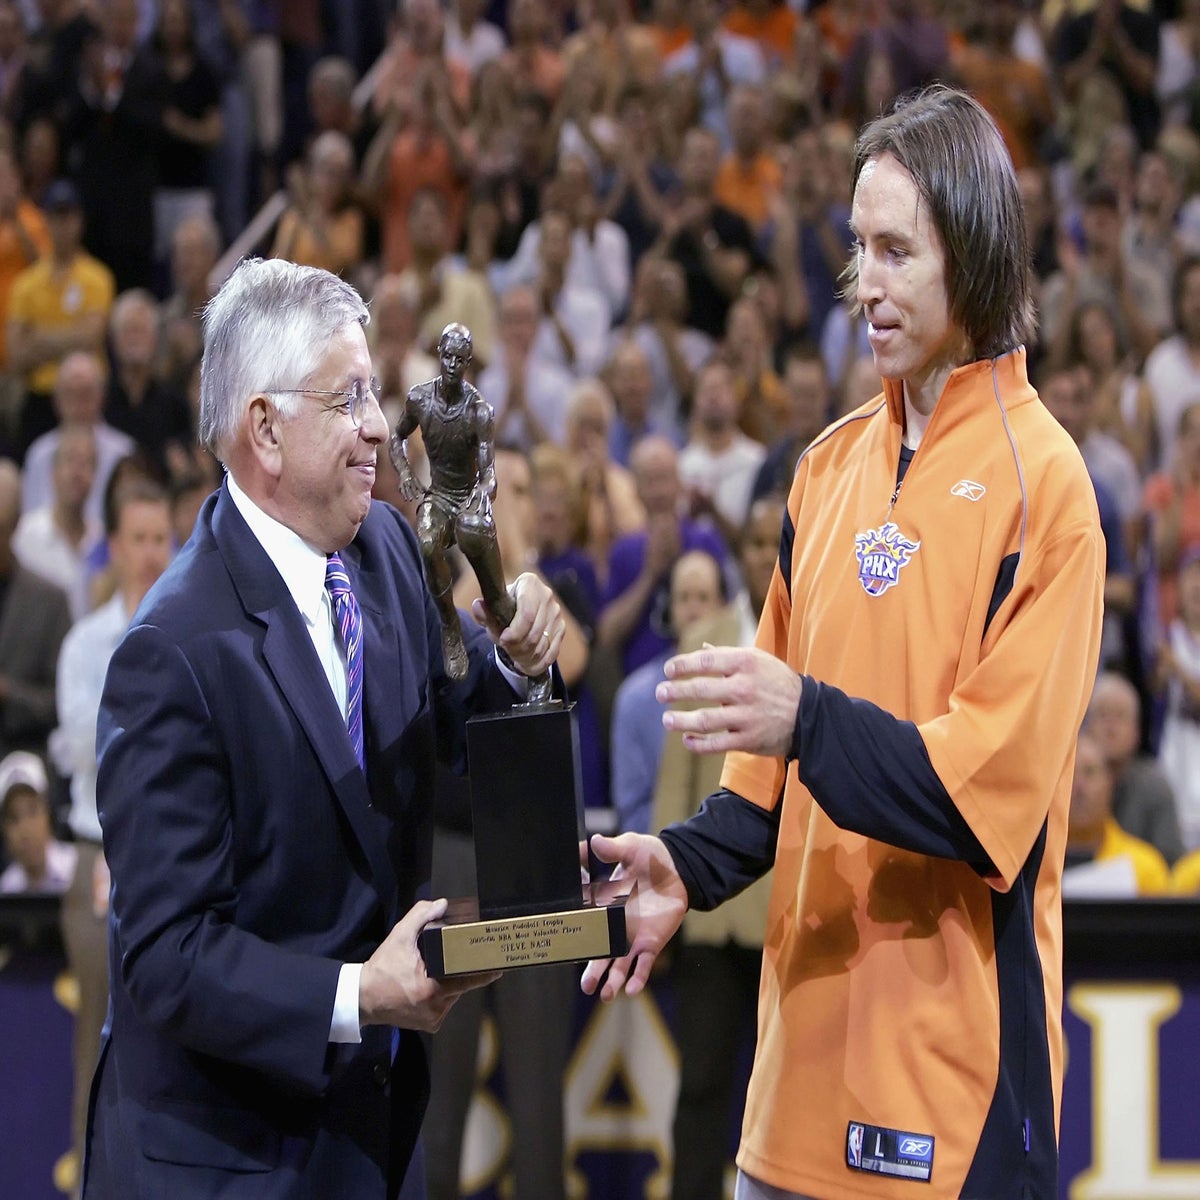 Steve Nash retires: Two-time MVP ends stellar career after long battle with  injuries, The Independent